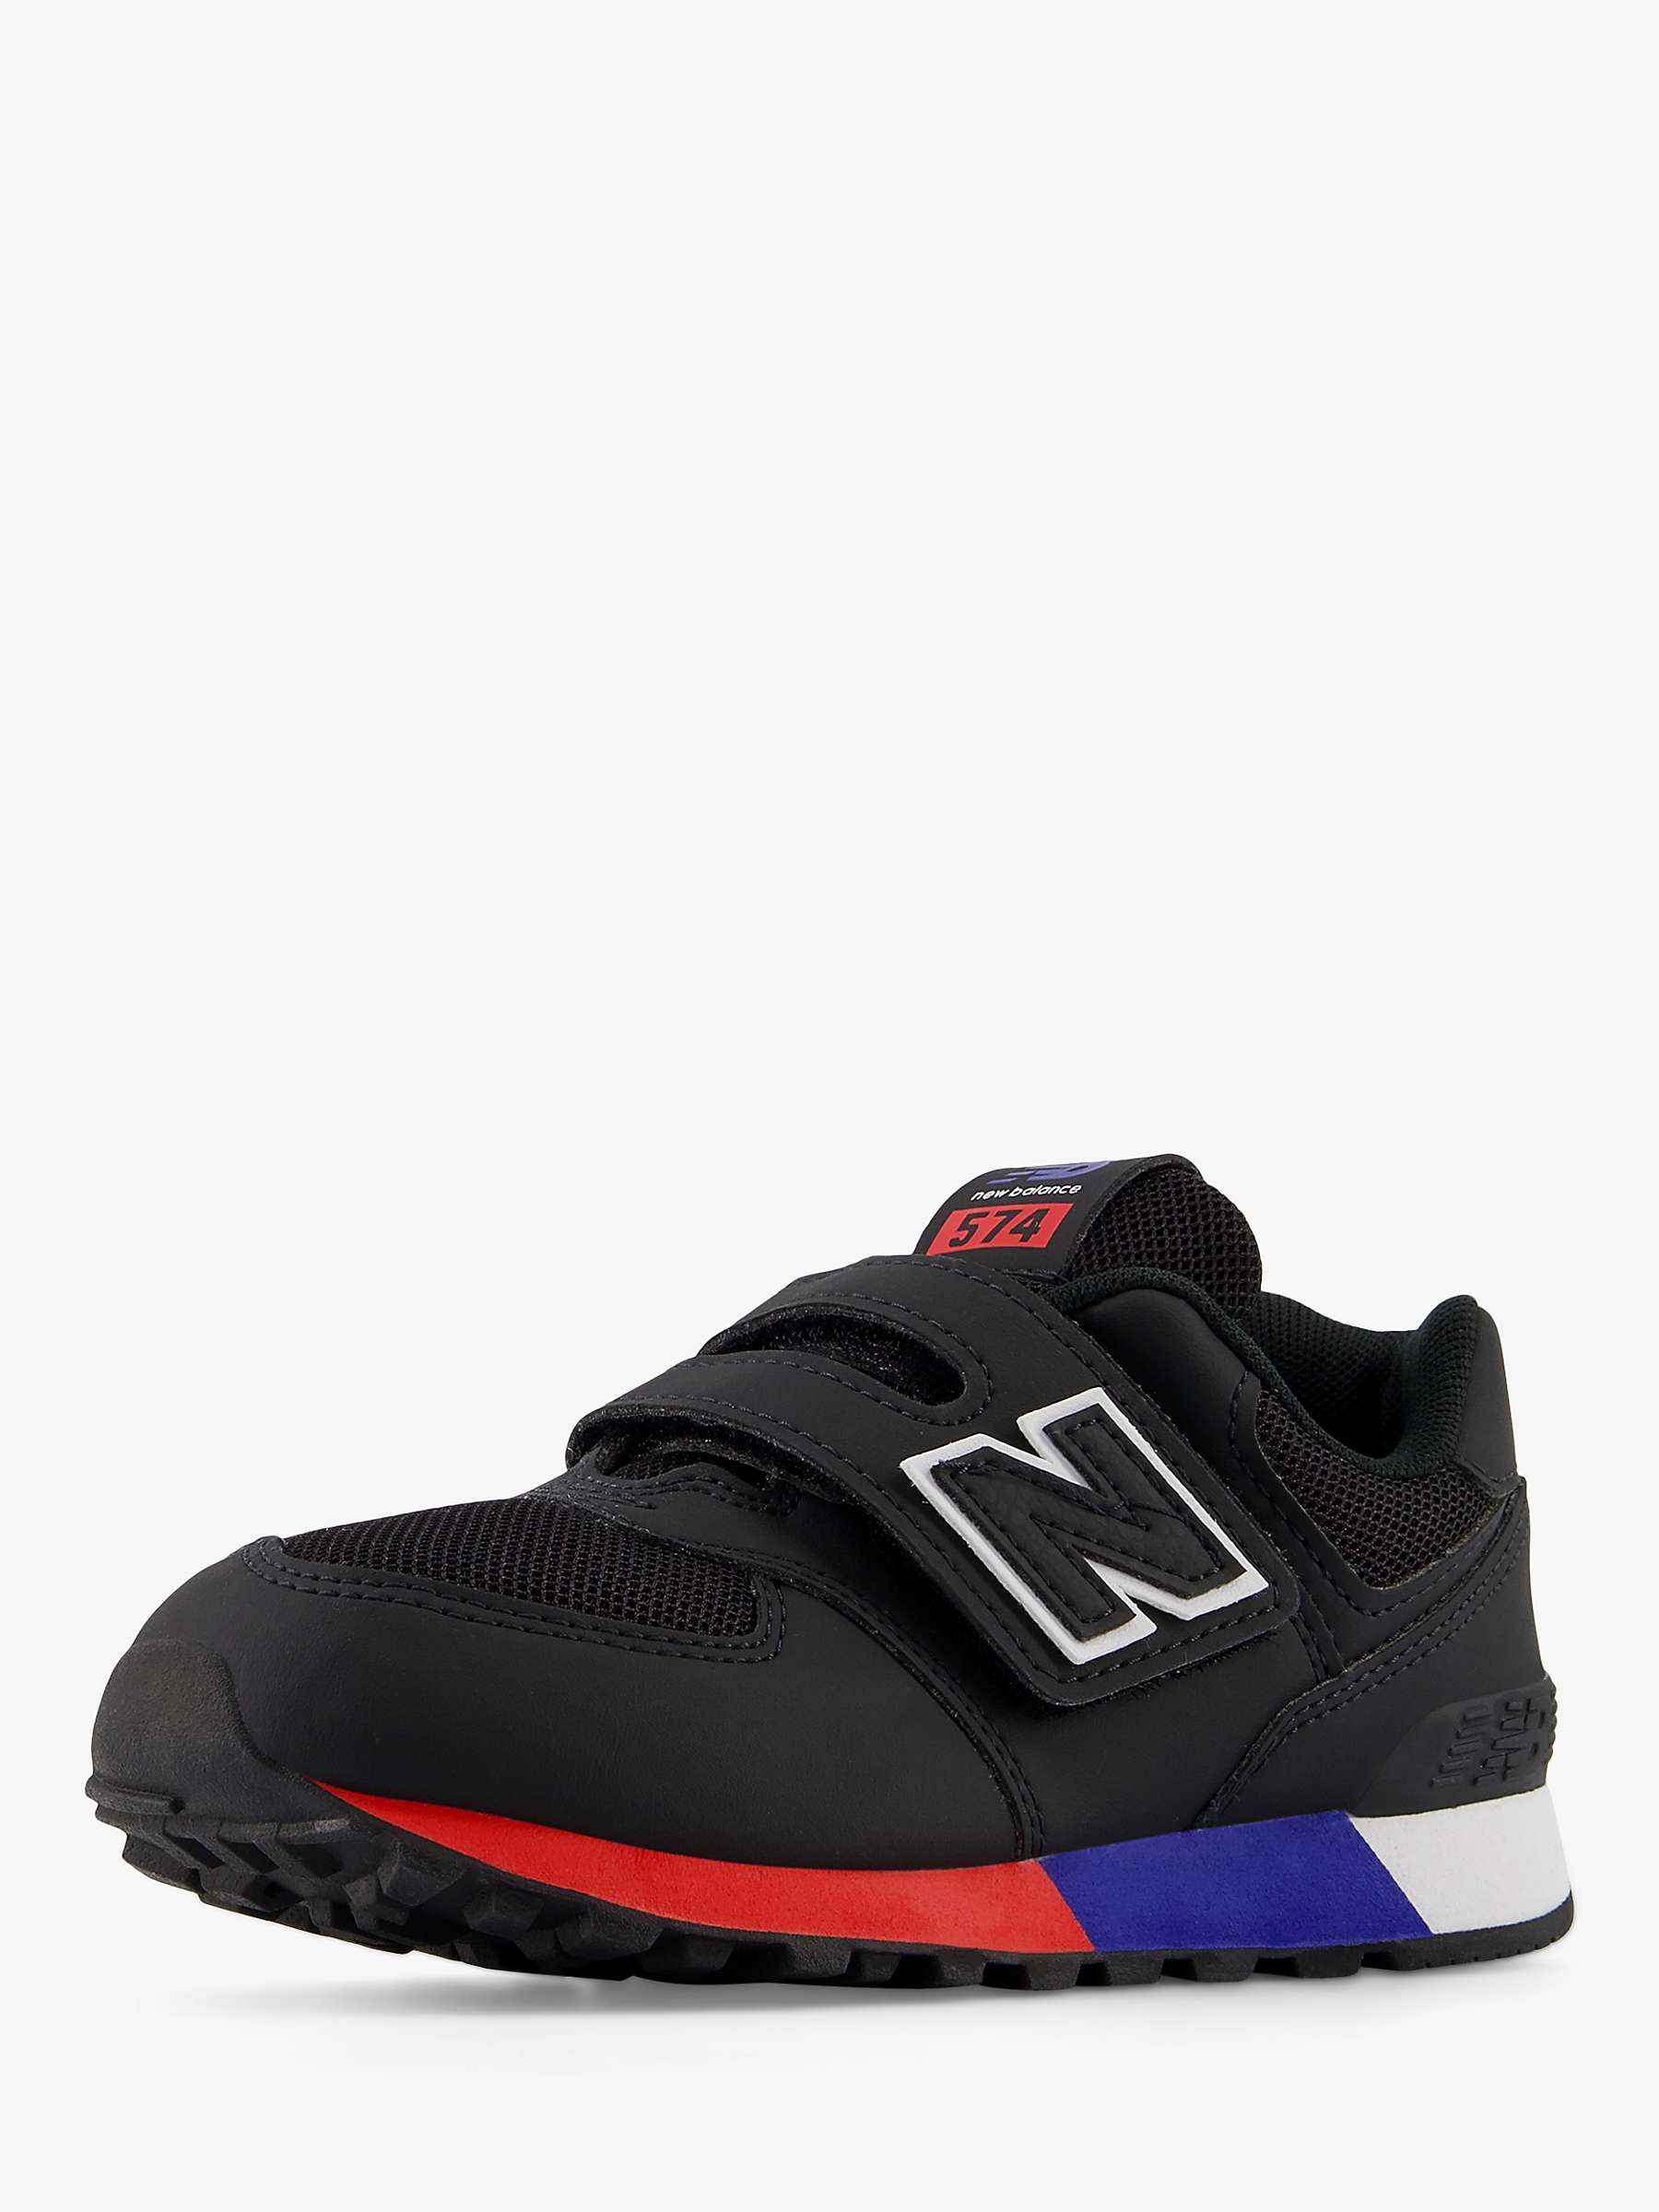 Buy New Balance Kids' 574 Velcro Trainers Online at johnlewis.com